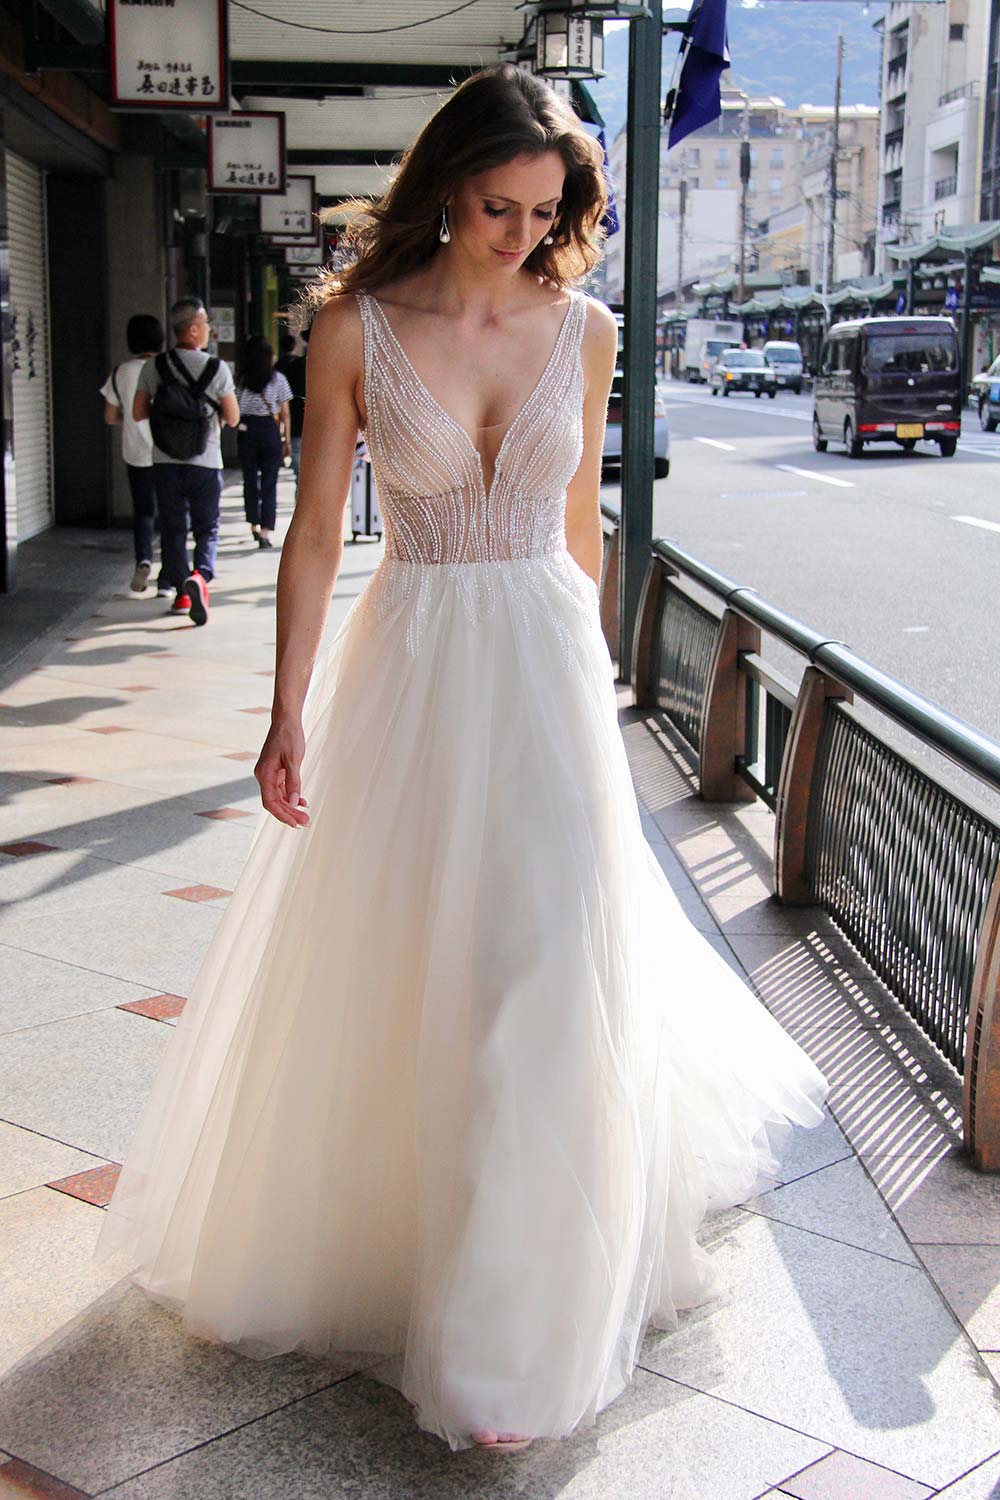 Female model wearing Vinka Design An Oriental Affair Wedding Dress. On a Japanese street the back detail of a gown with a hand-beaded, nude-based, semi sheer bodice with a deep v-neckline and low back with a tulle skirt.